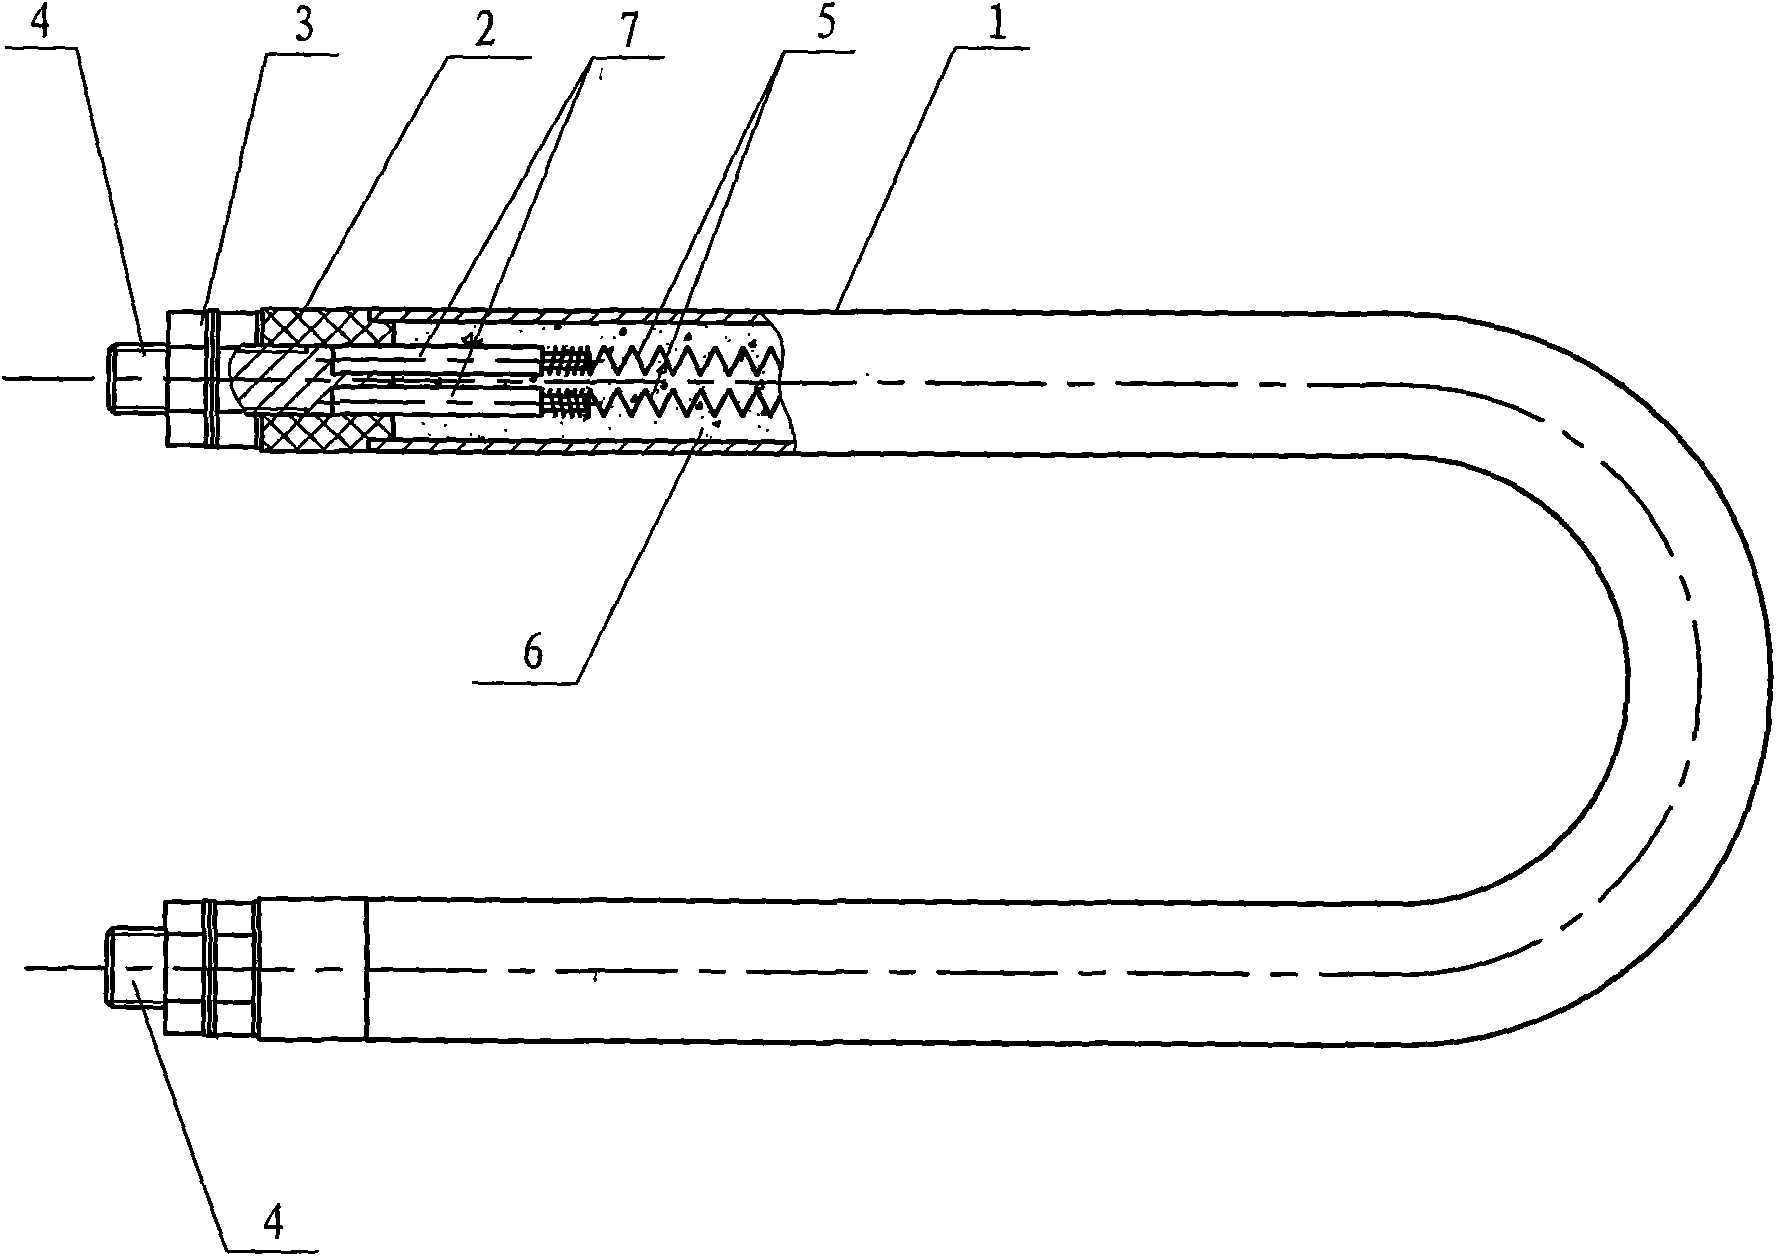 Non-inductance electric heating resistance device